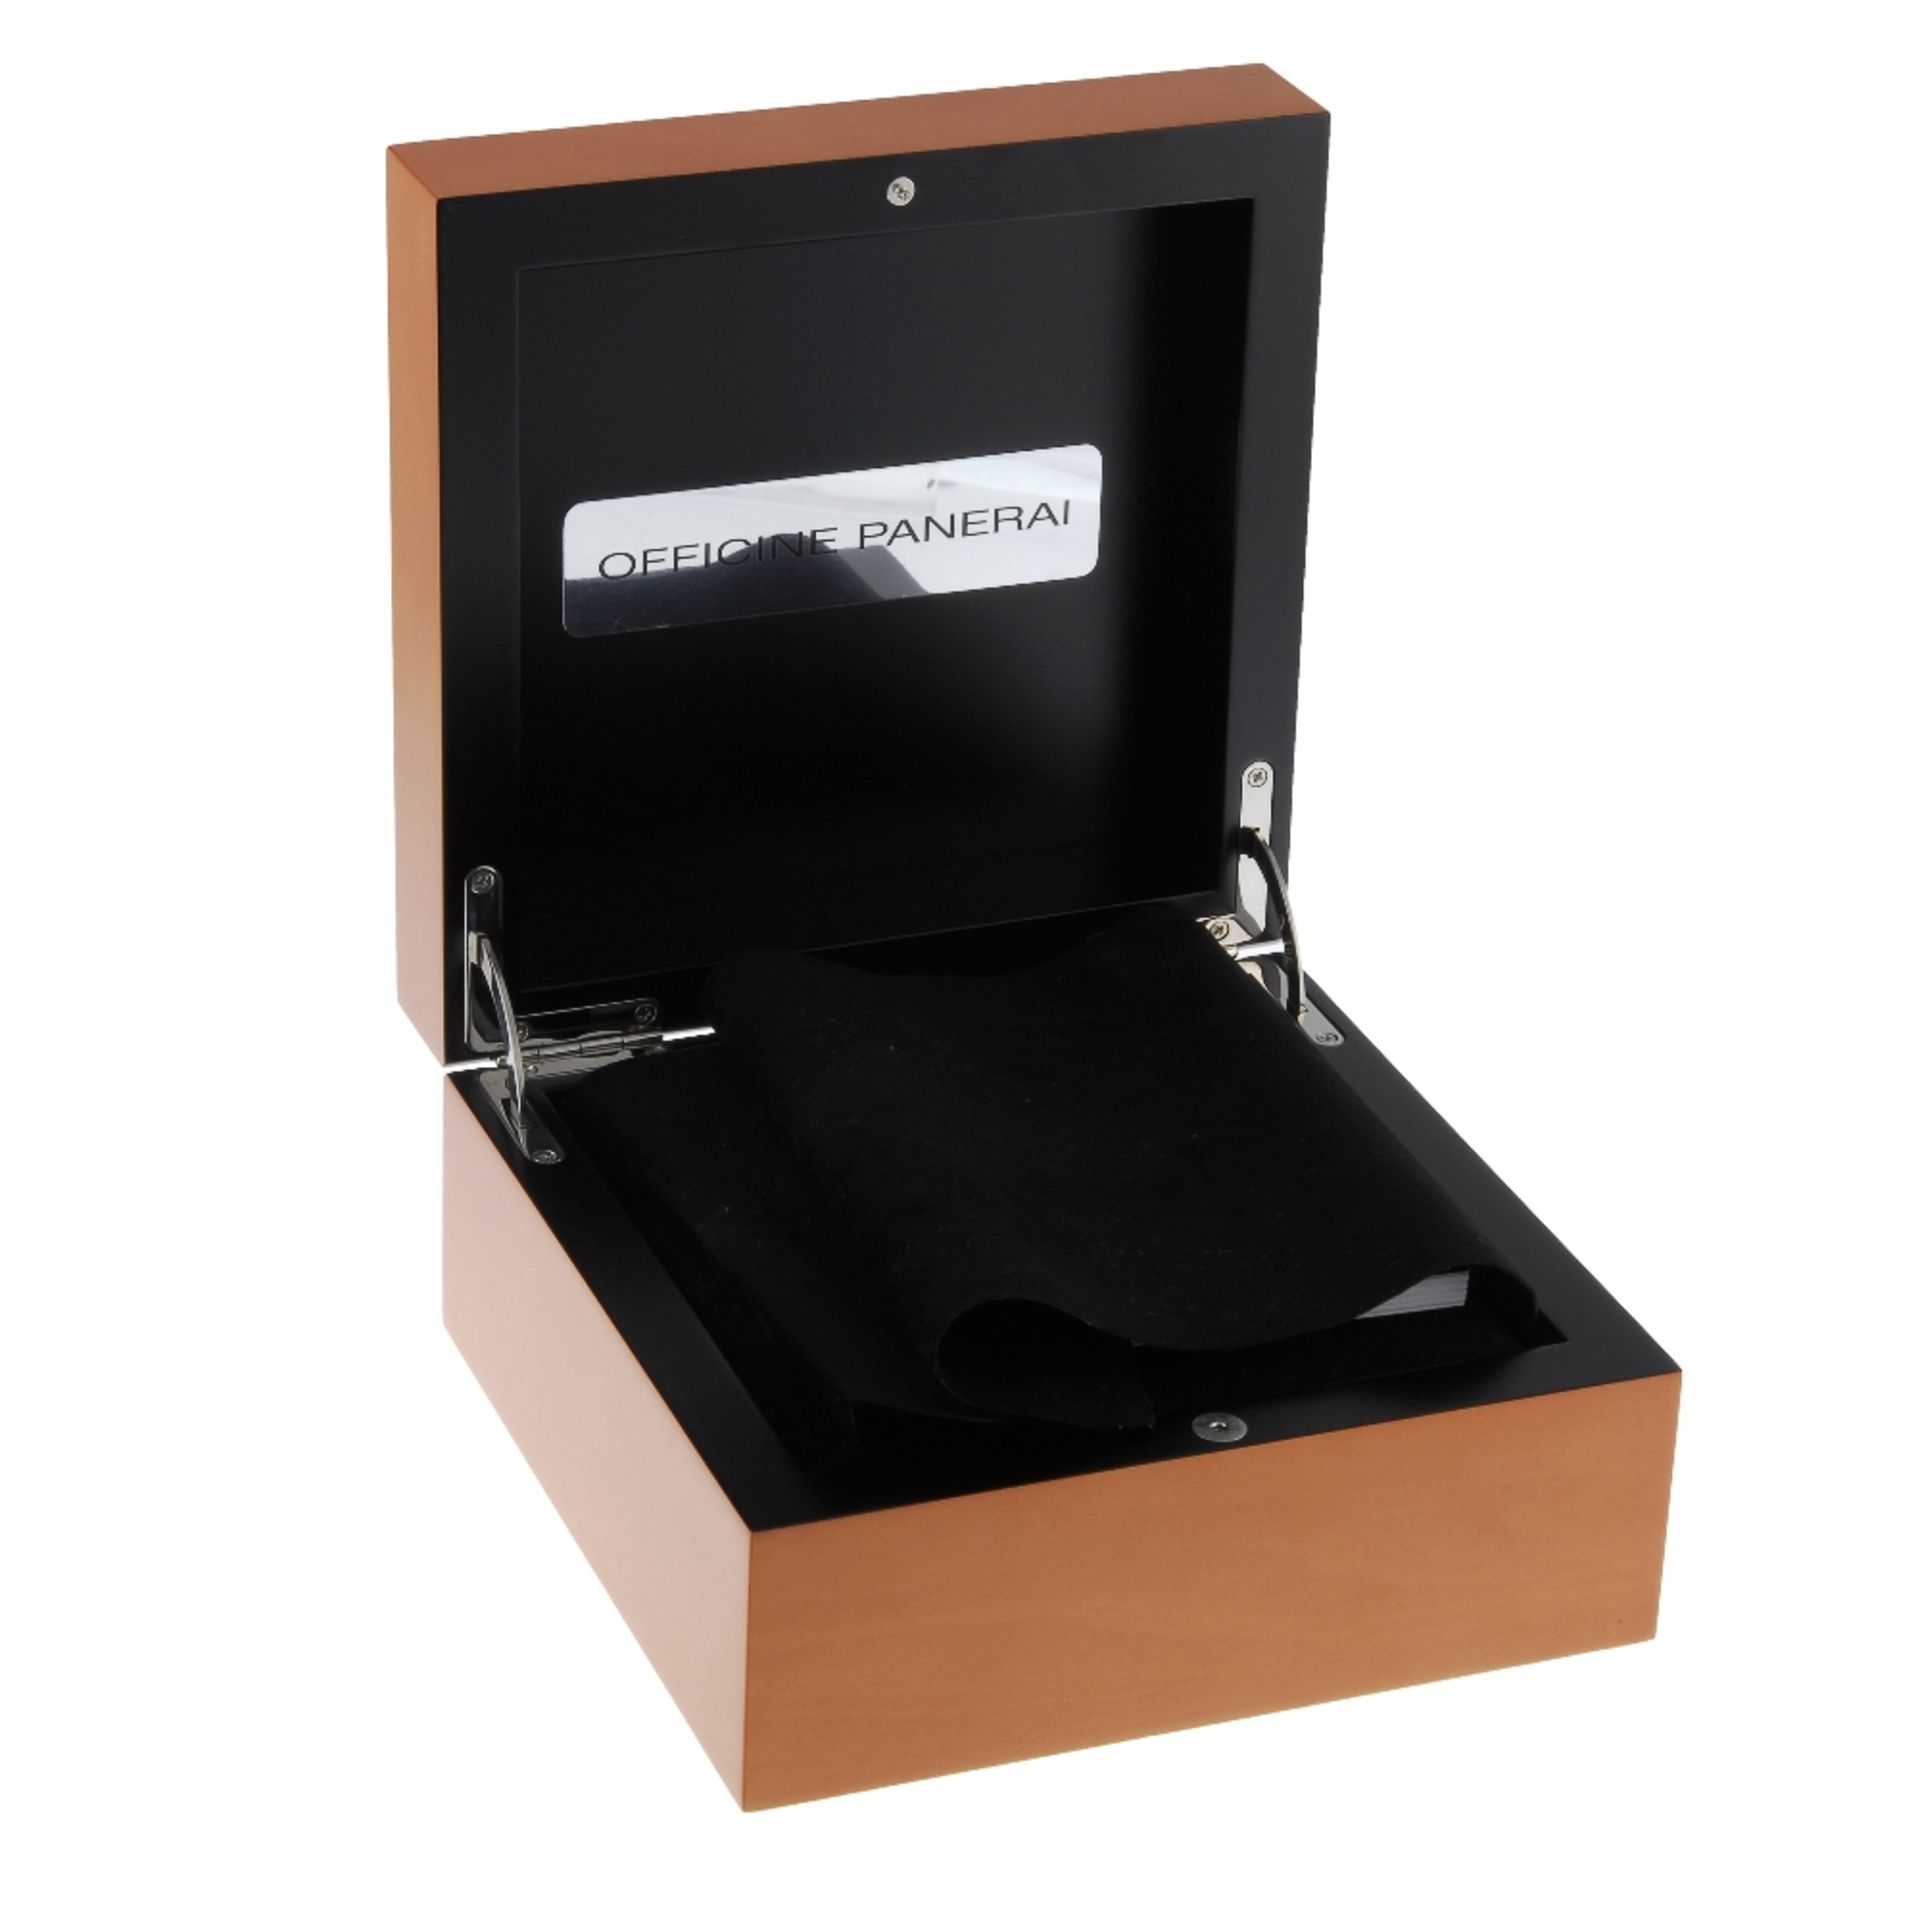 PANERAI - a complete watch box. Inner box is in a clean and pleasant condition. Outer box shows some